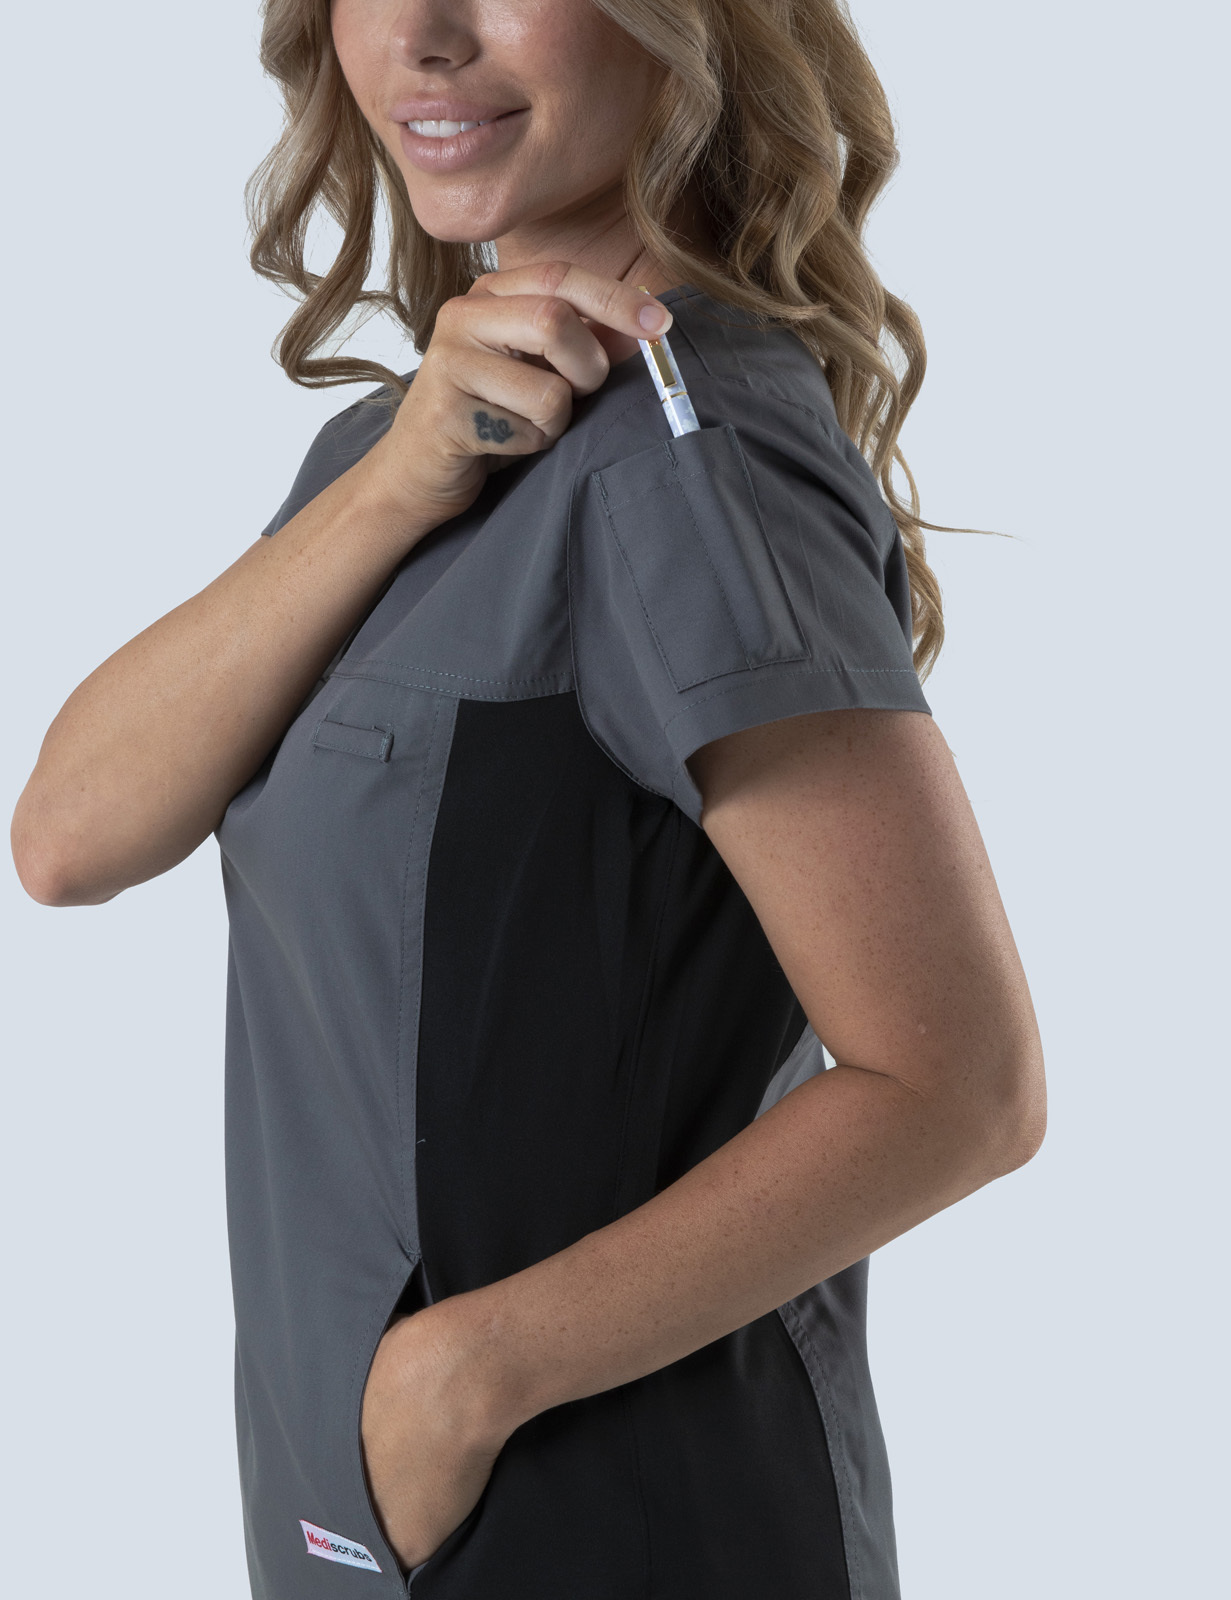 Ashmore Retreat Endorsed Enrolled Nurse Top Only Bundle (Women's Fit Spandex in Steel Grey incl Logo) 